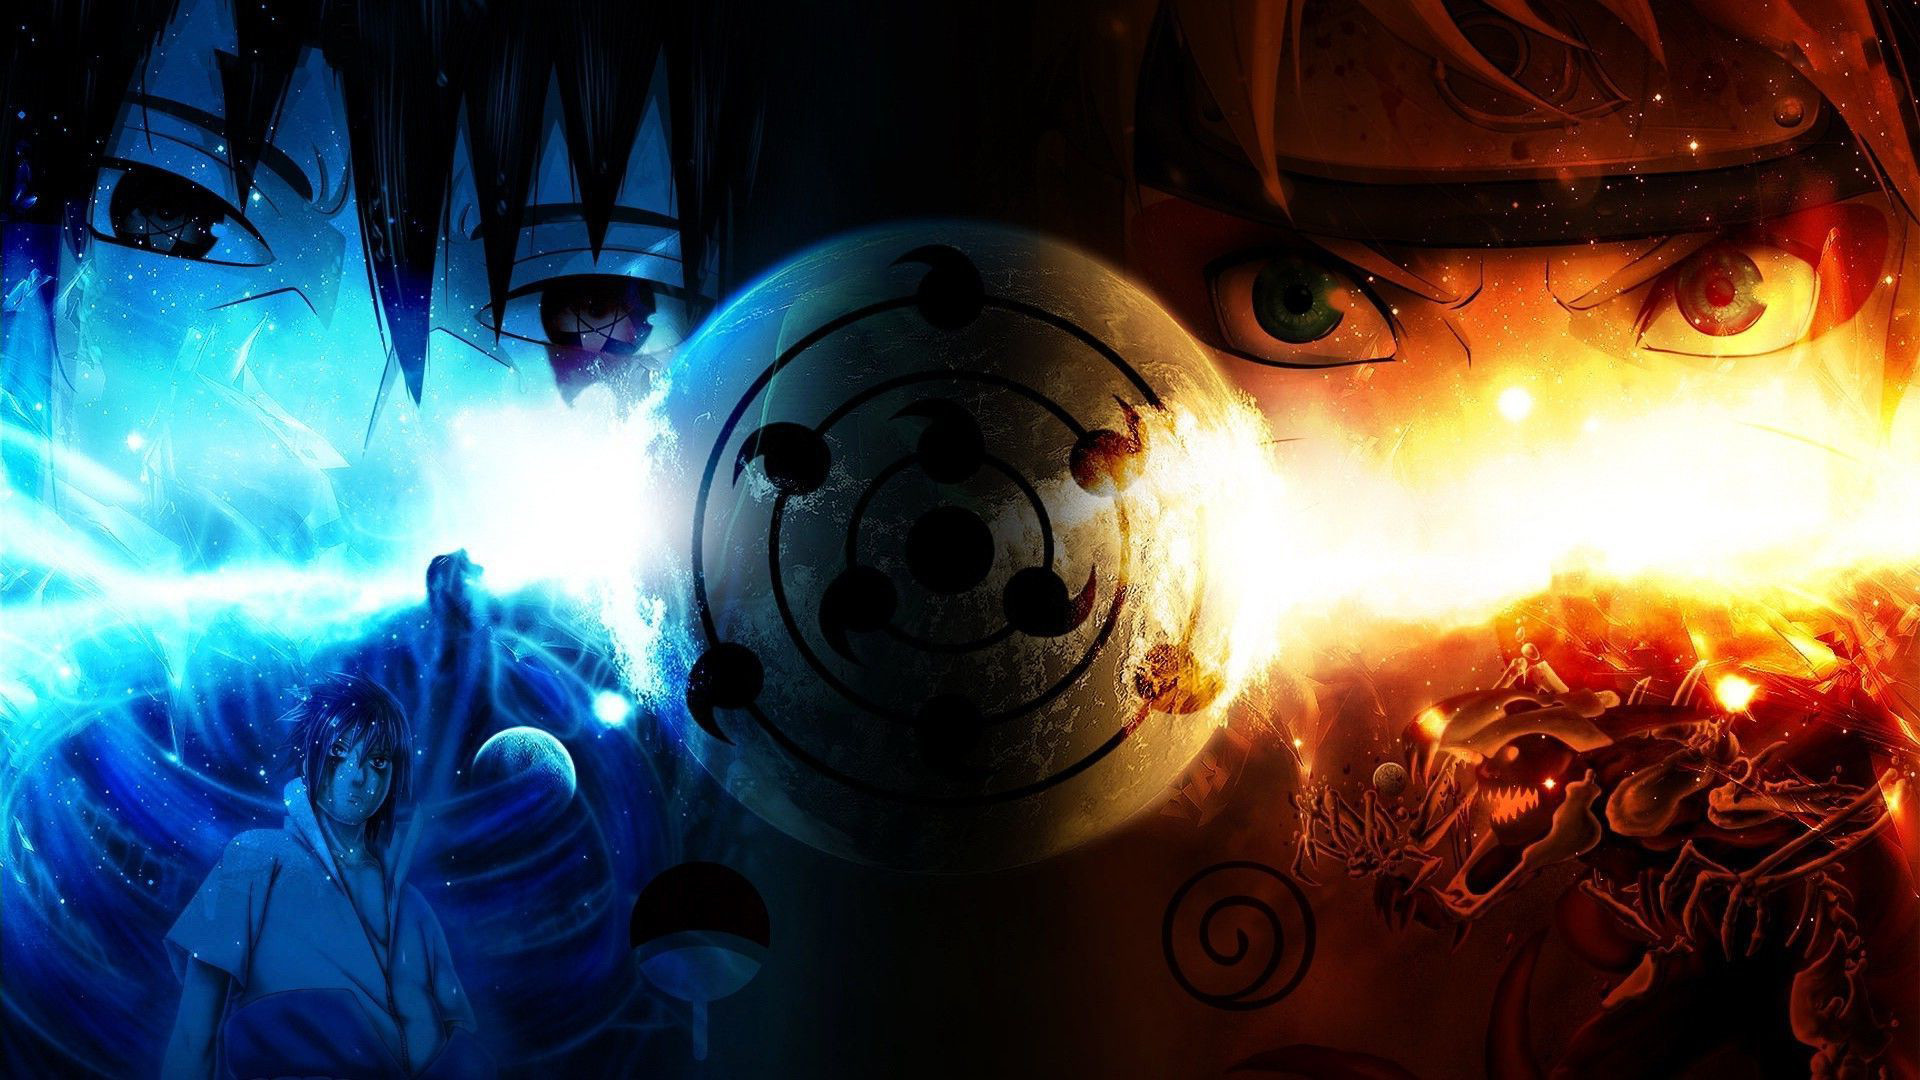 1920x1080 naruto fire and ice hd anime wallpaper desktop wallpapers 4k high  definition windows 10 mac apple backgrounds download wallpaper free  1920Ã1080 Wallpaper HD